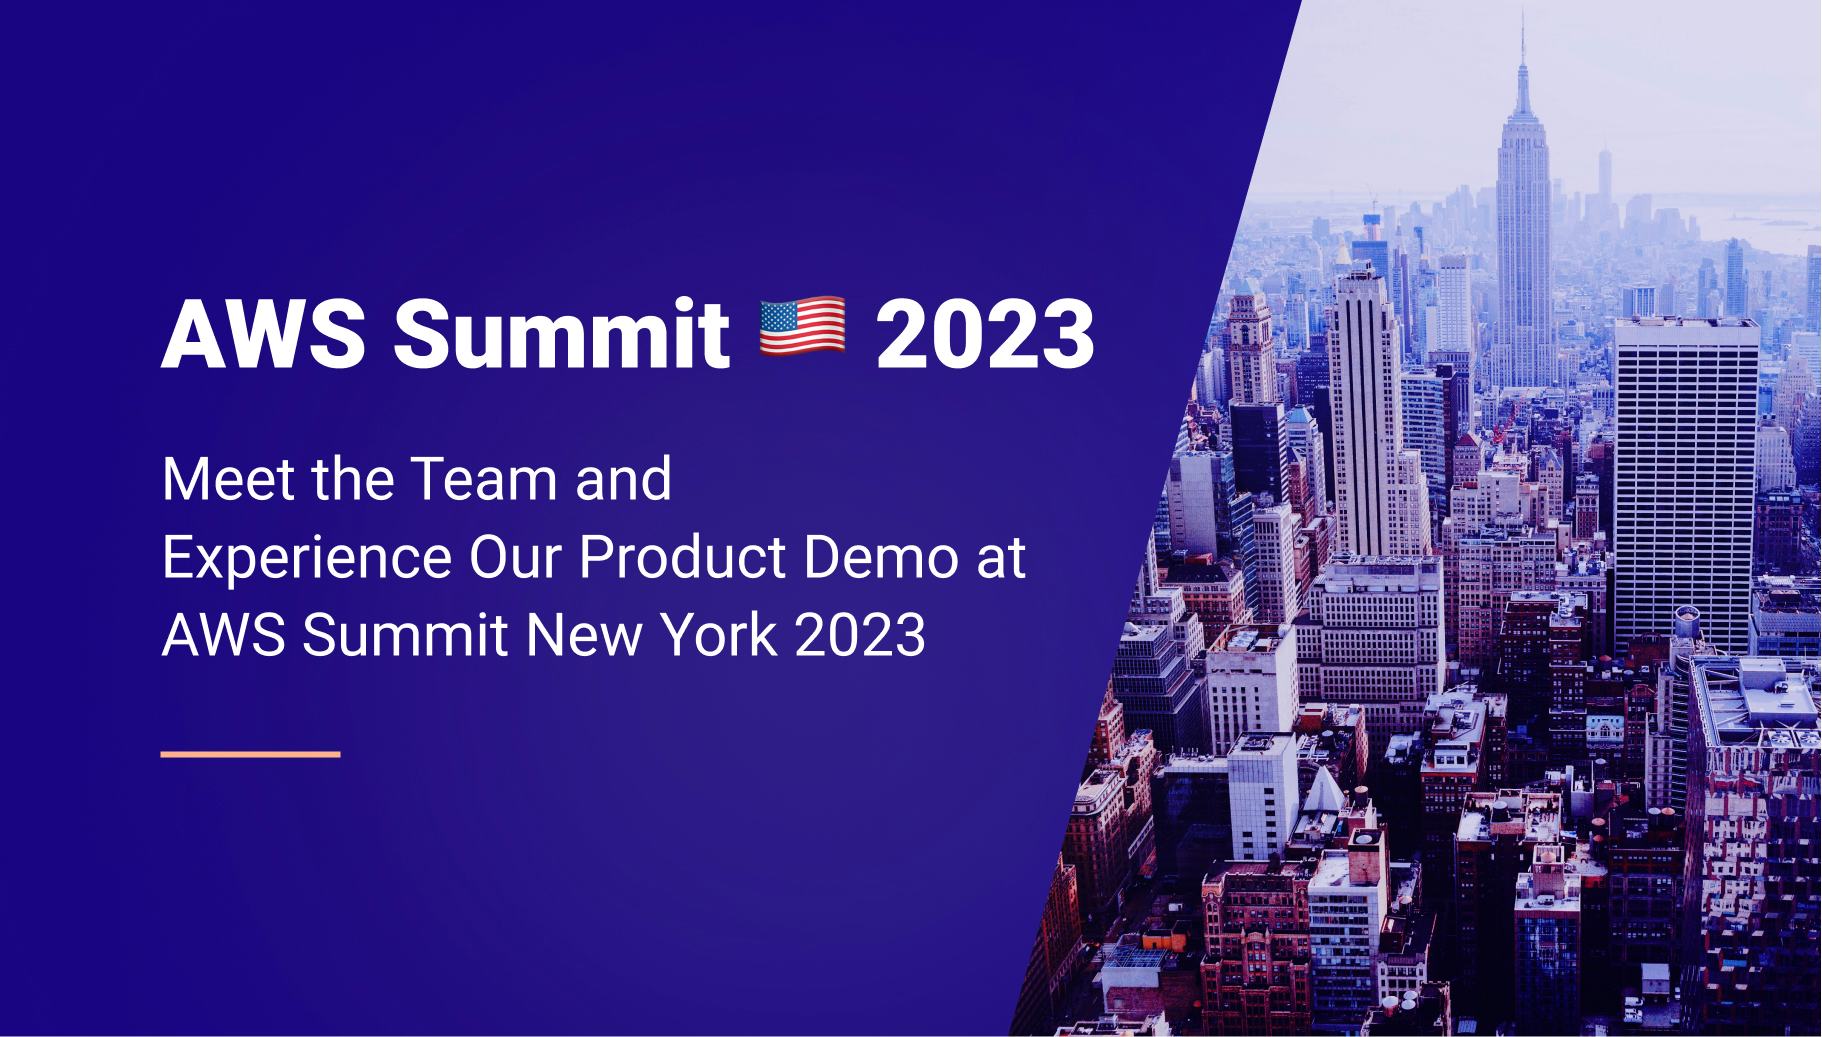 Join Qovery at AWS Summit New York 2023 - Meet the Team and Experience Our Product Demo! - Qovery